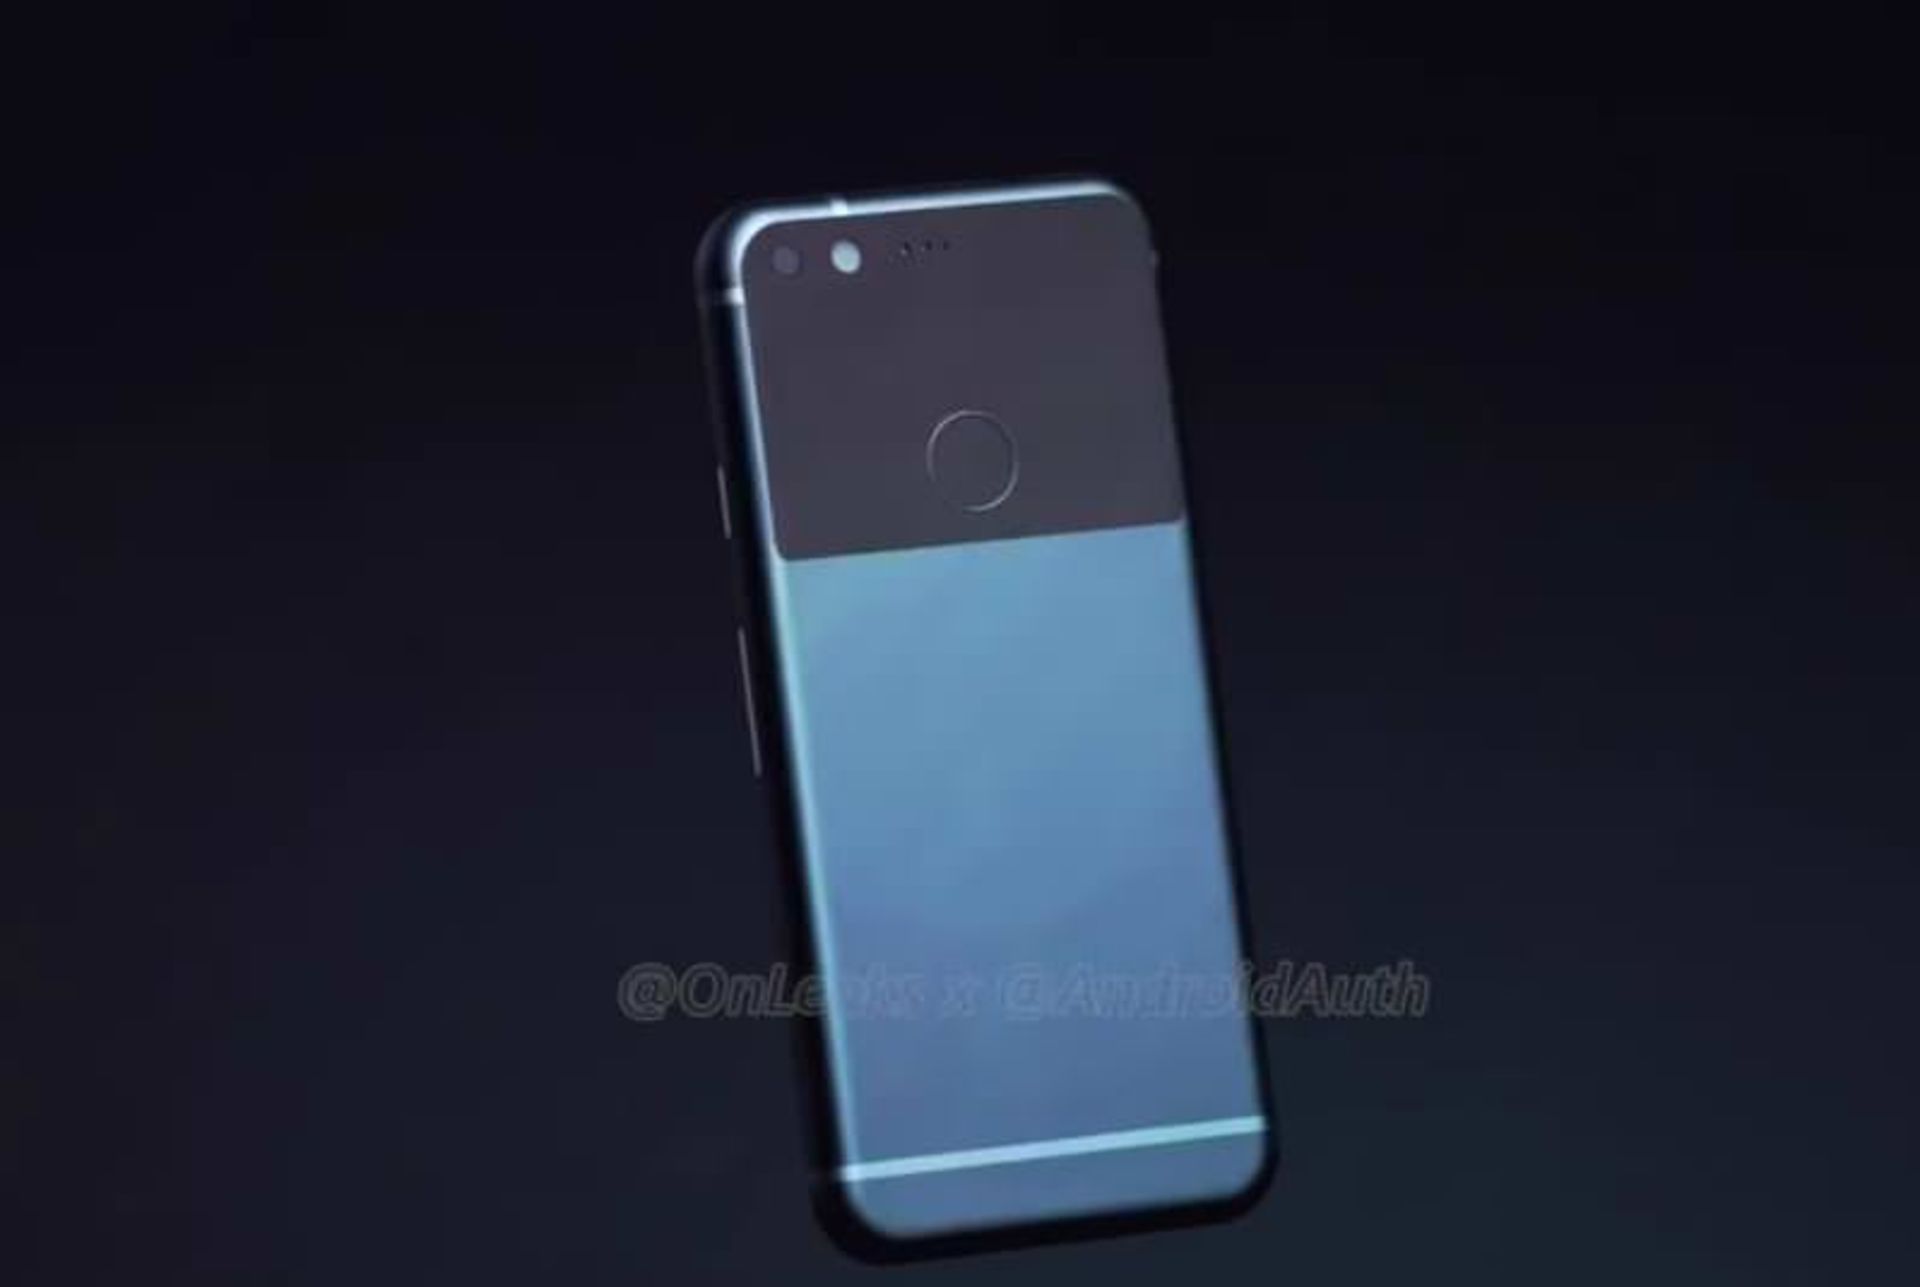 at-least-one-of-the-new-pixel-phones-will-be-made-of-metal-and-glass